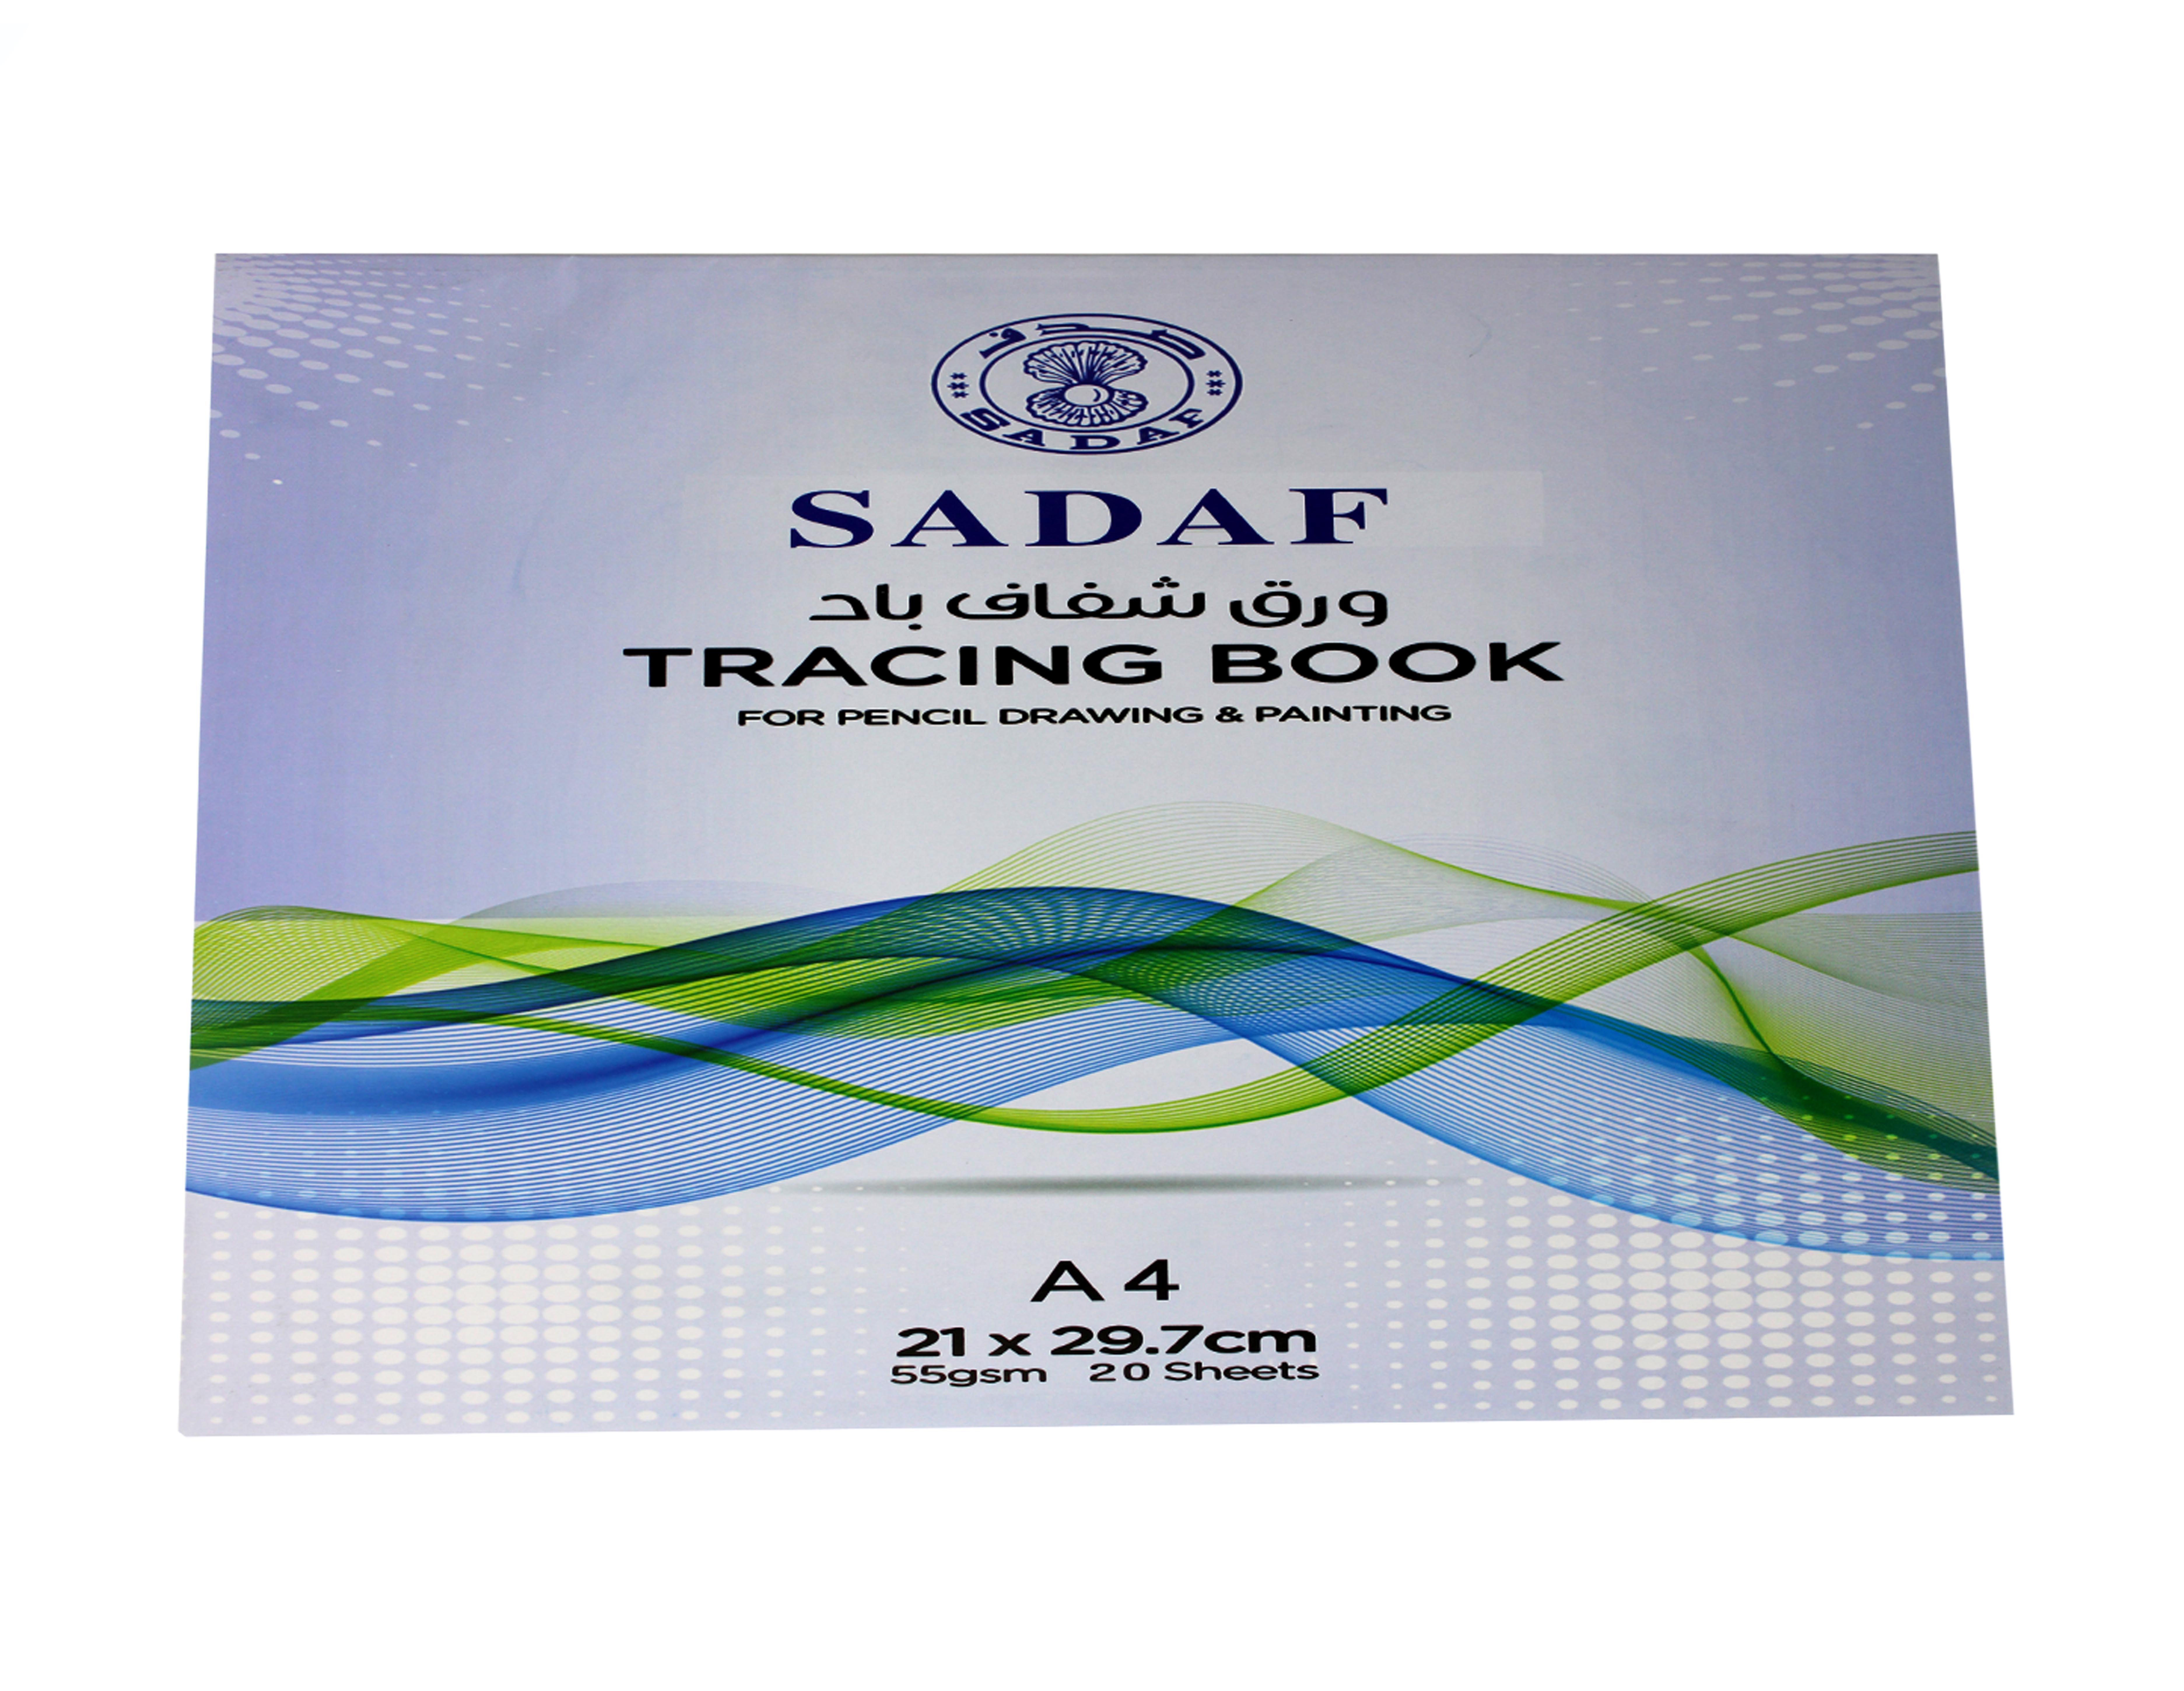 SADAF TRACING BOOK A4 SIZE FOR PENCIL DRAWING AND PAINTING(210*297MM) 21*29.7CM 55GSM 20 SHEETS